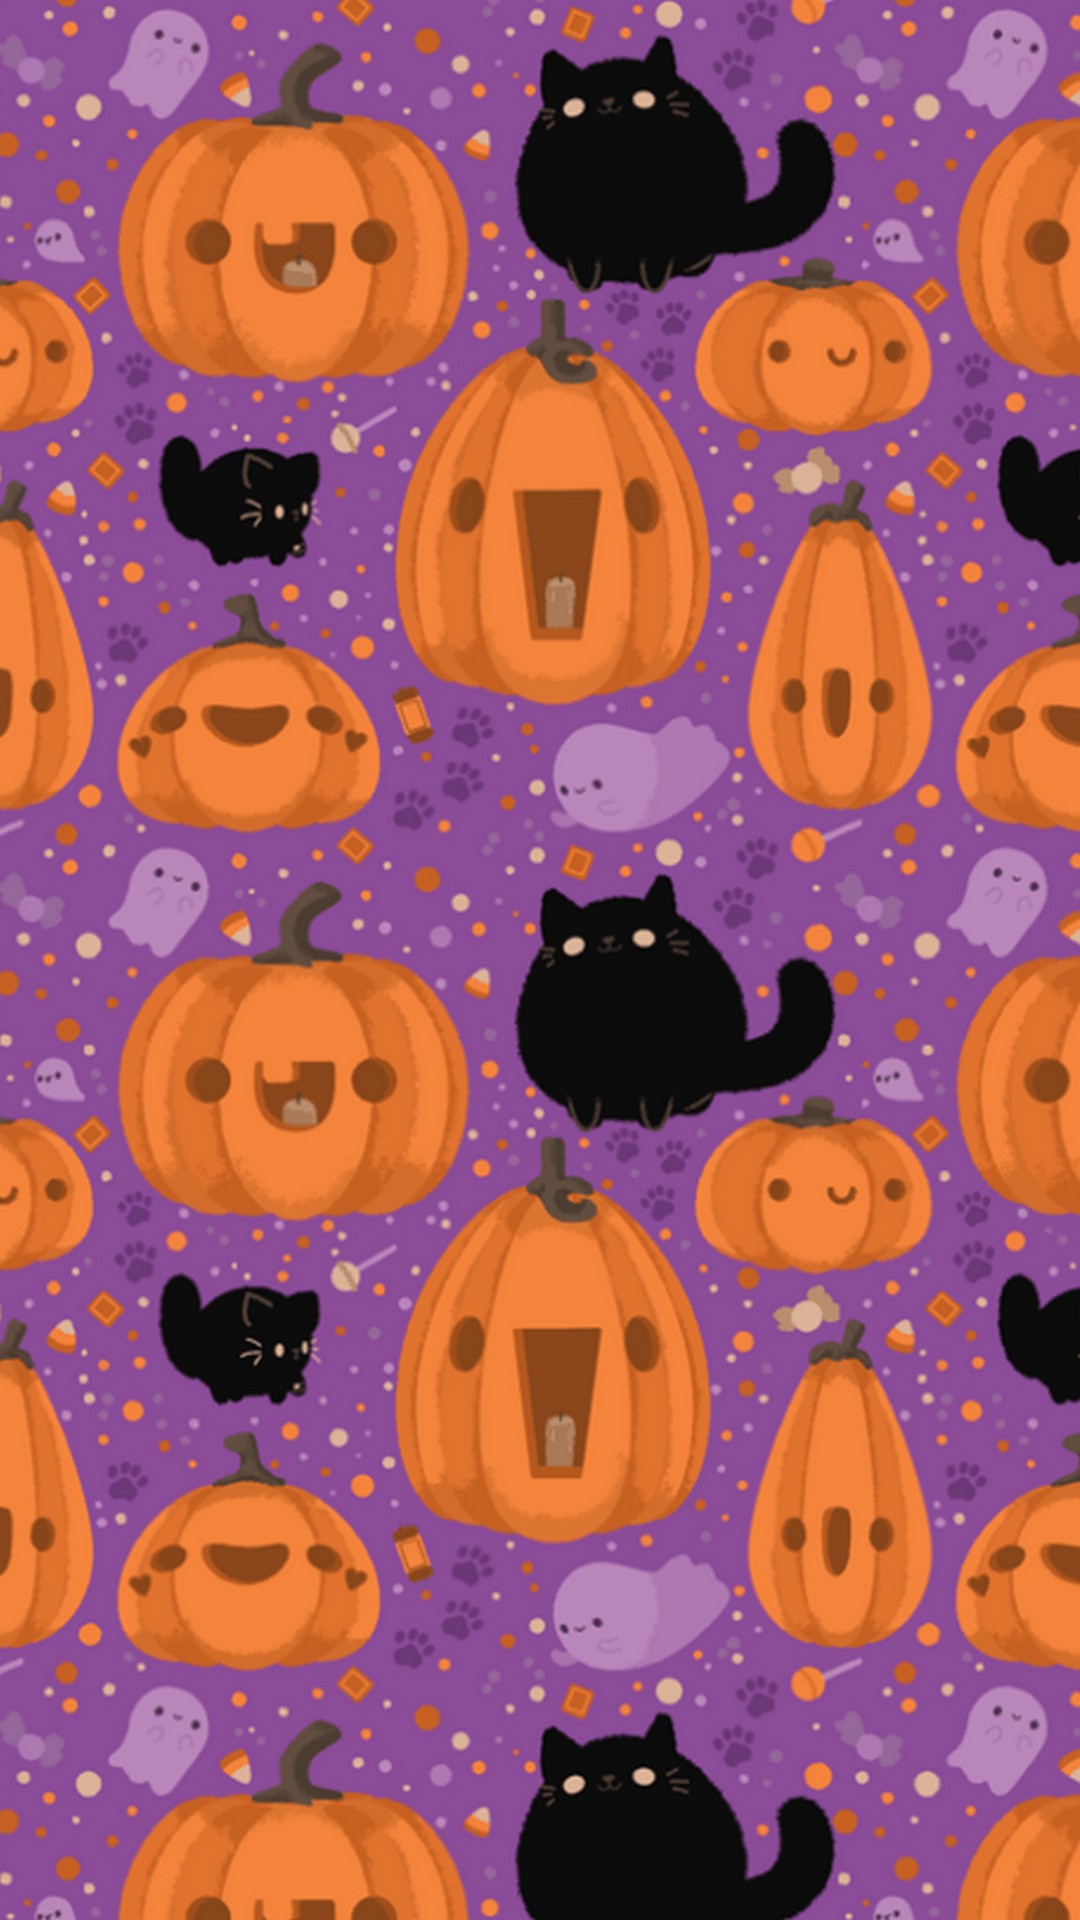 Halloween Aesthetic Backgrounds For Android With high-resolution 1080X1920 pixel. You can use this wallpaper for your Android backgrounds, Tablet, Samsung Screensavers, Mobile Phone Lock Screen and another Smartphones device